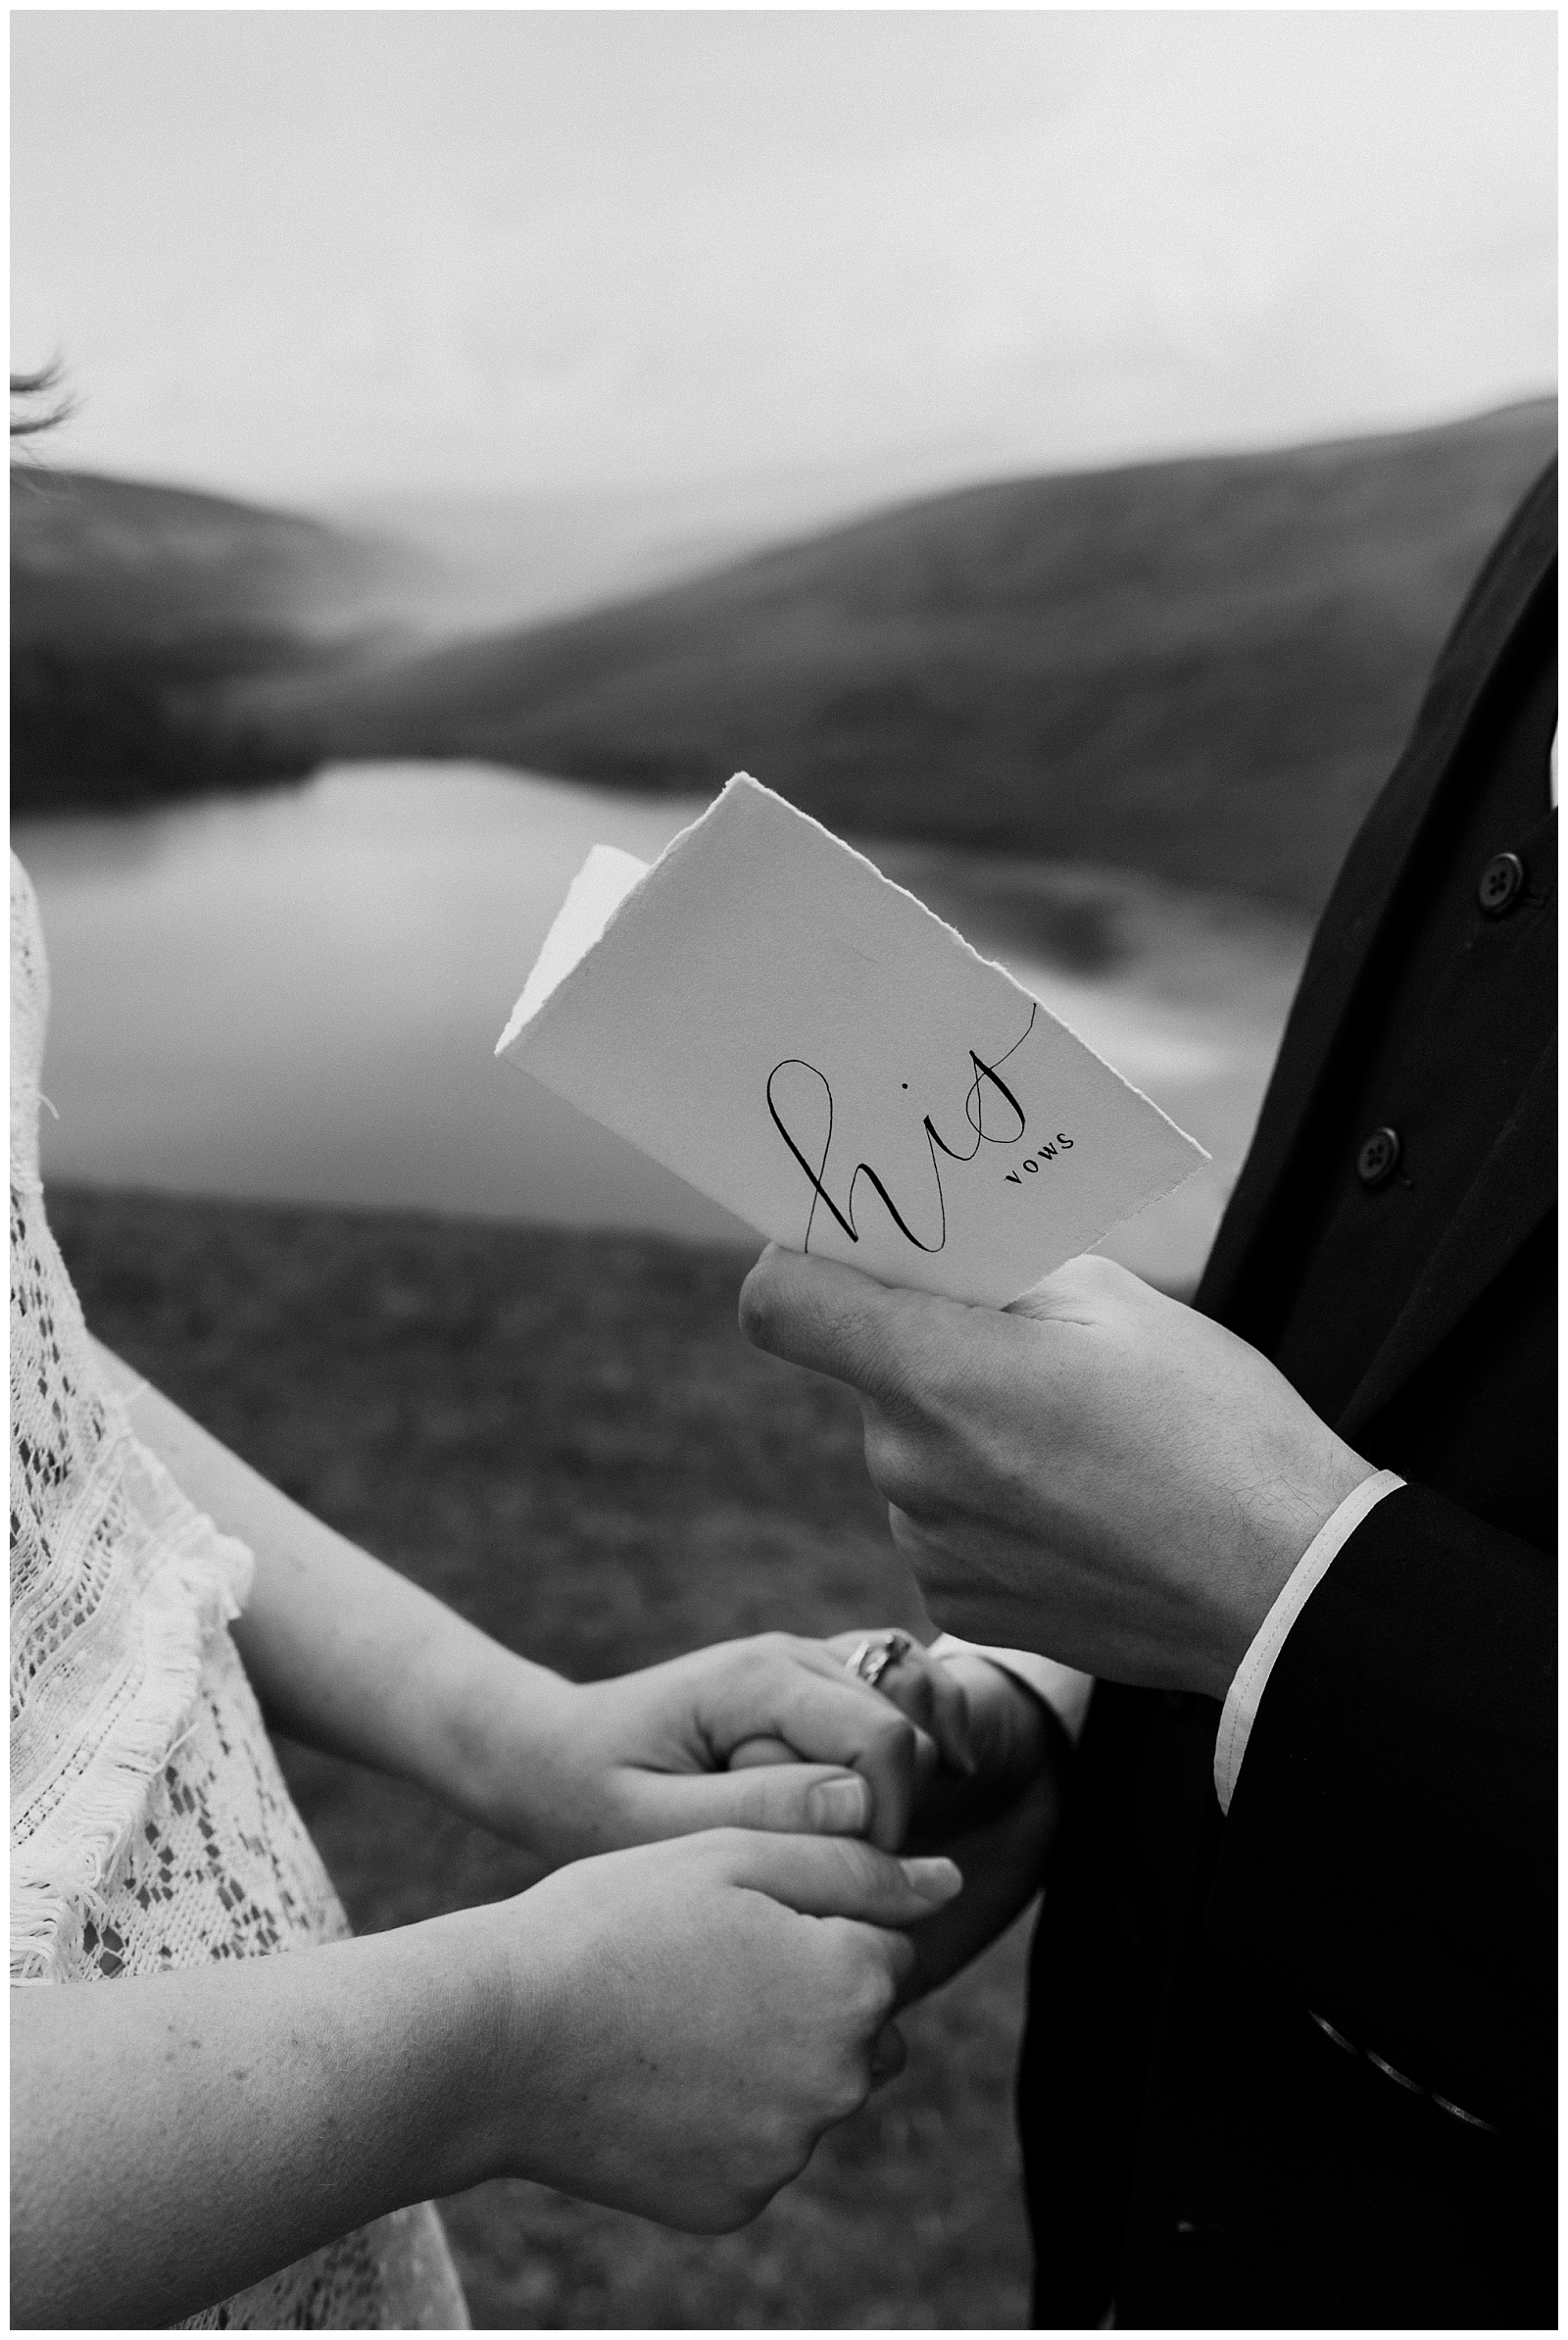 Couple reads vows from their vow books during their wedding ceremony in Ireland